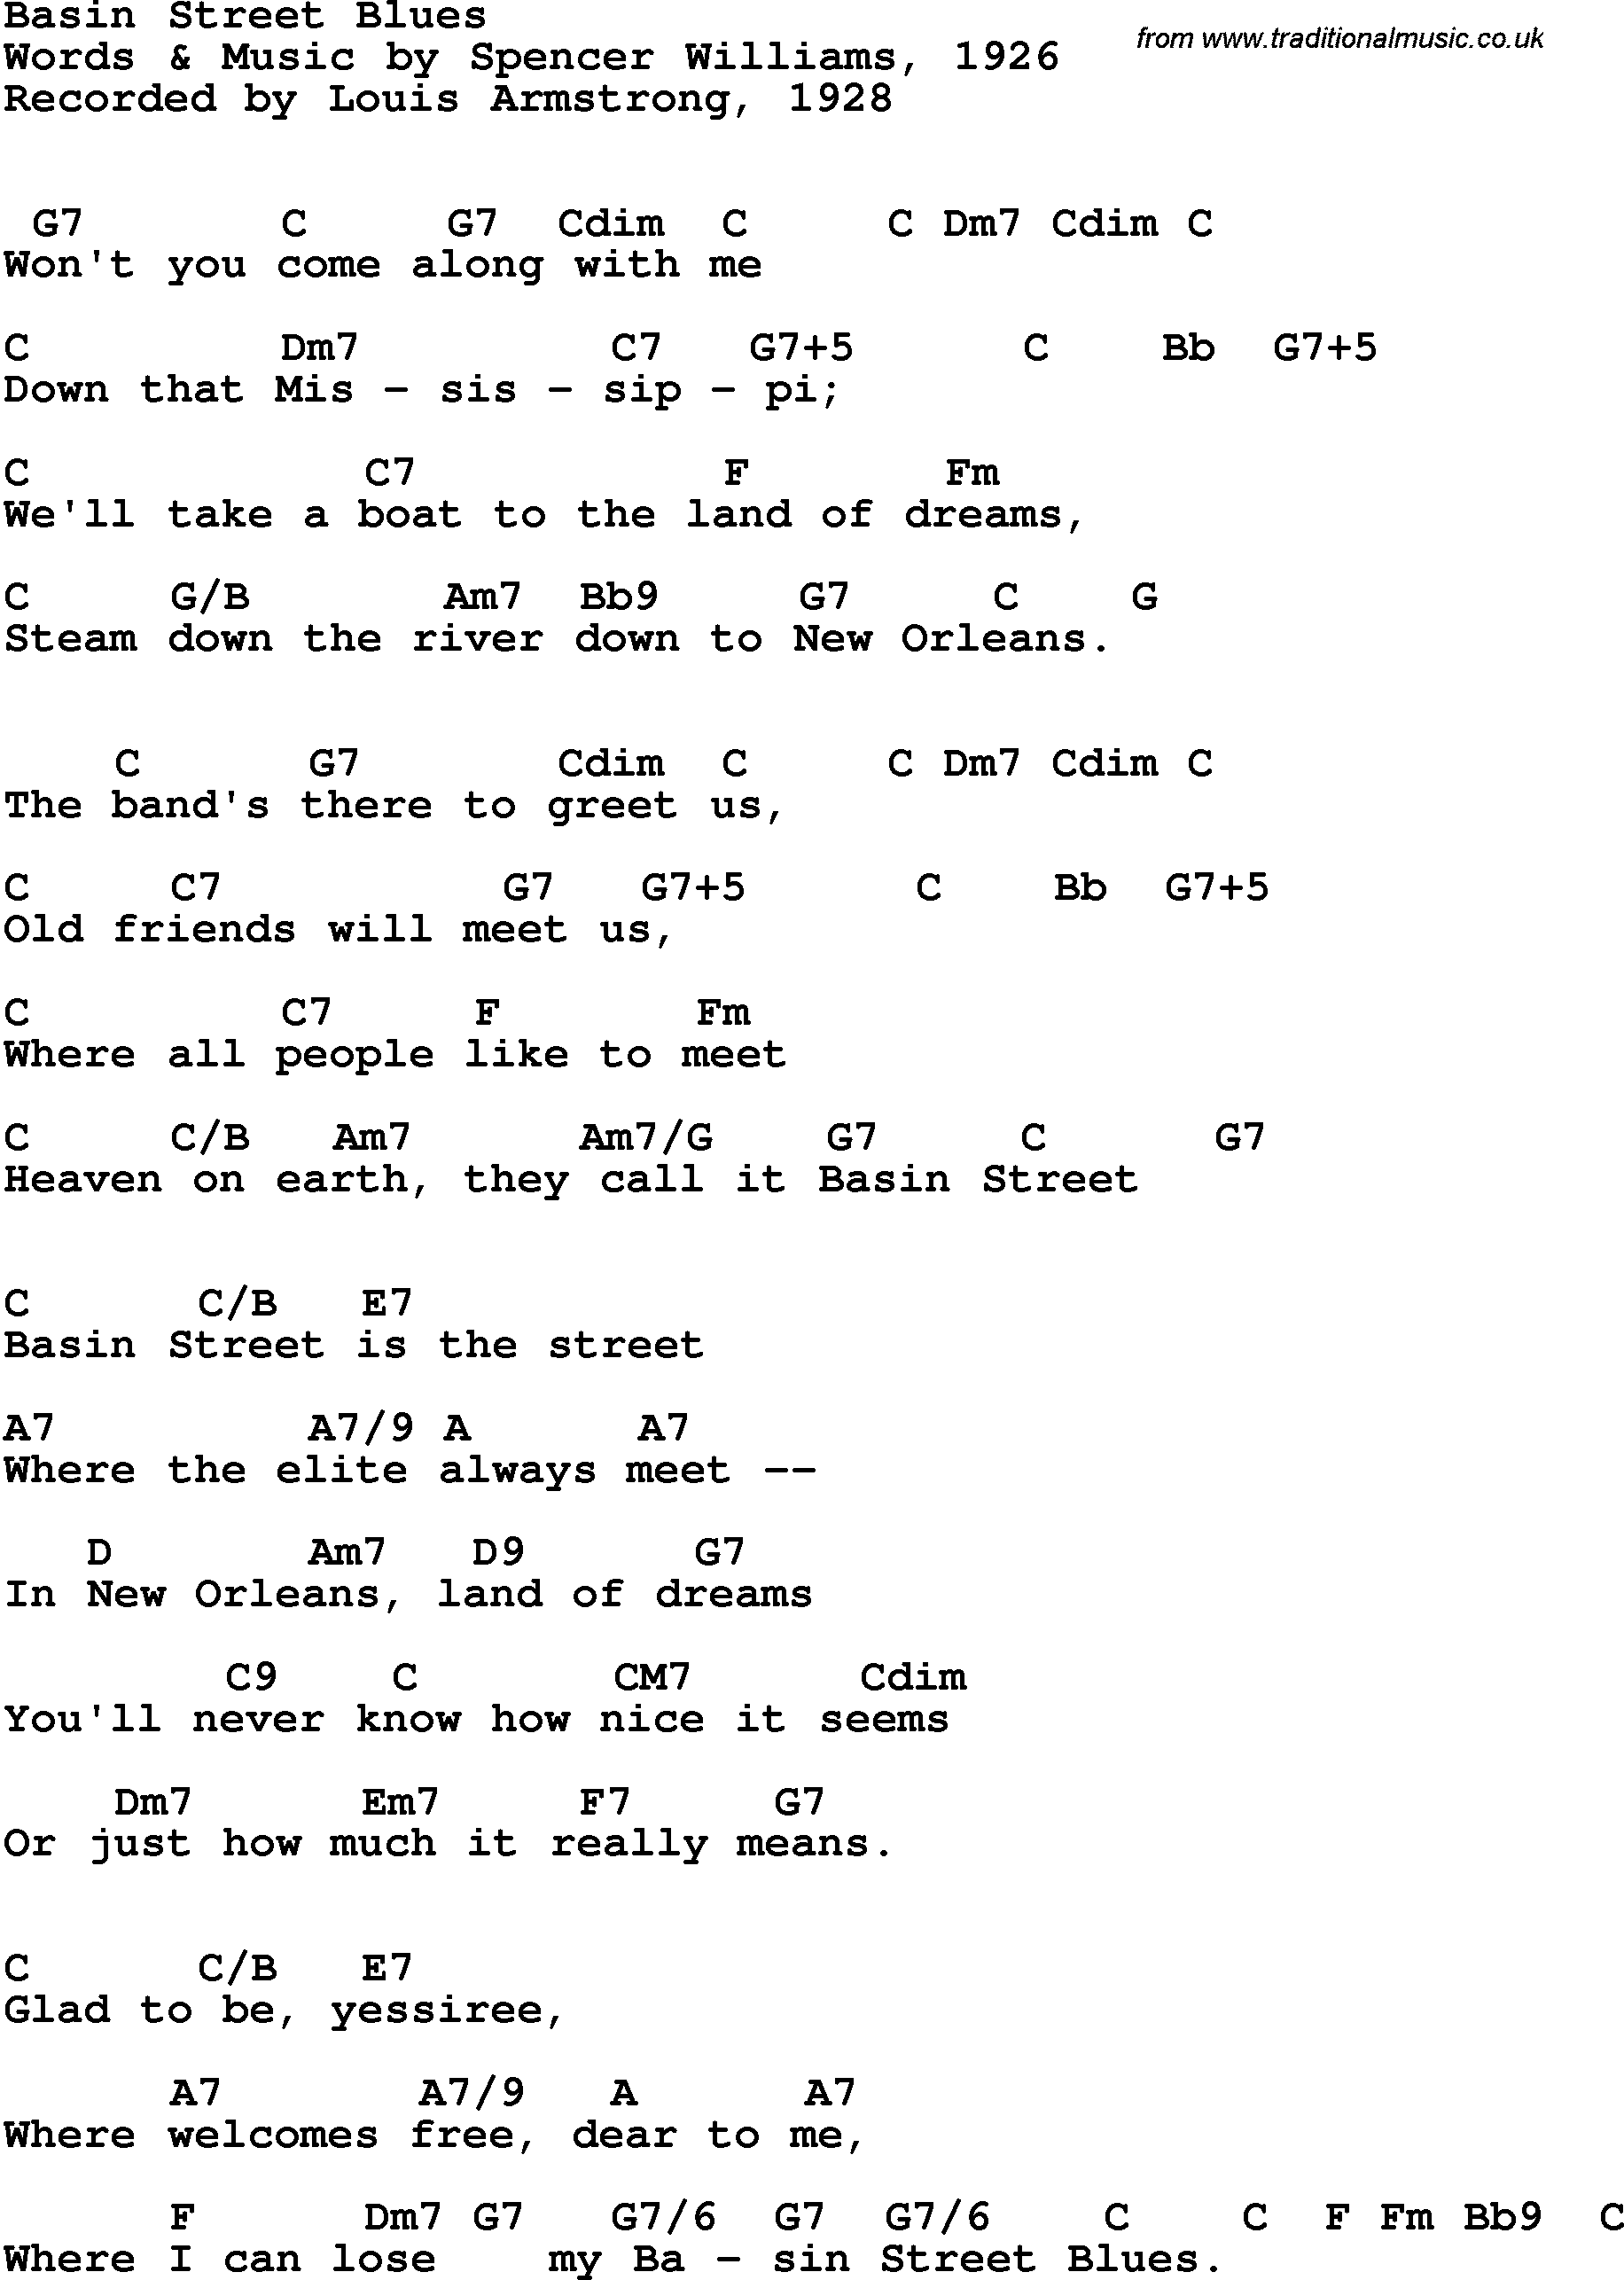 Song Lyrics with guitar chords for Basin Street Blues - Louis Armstrong, 1928